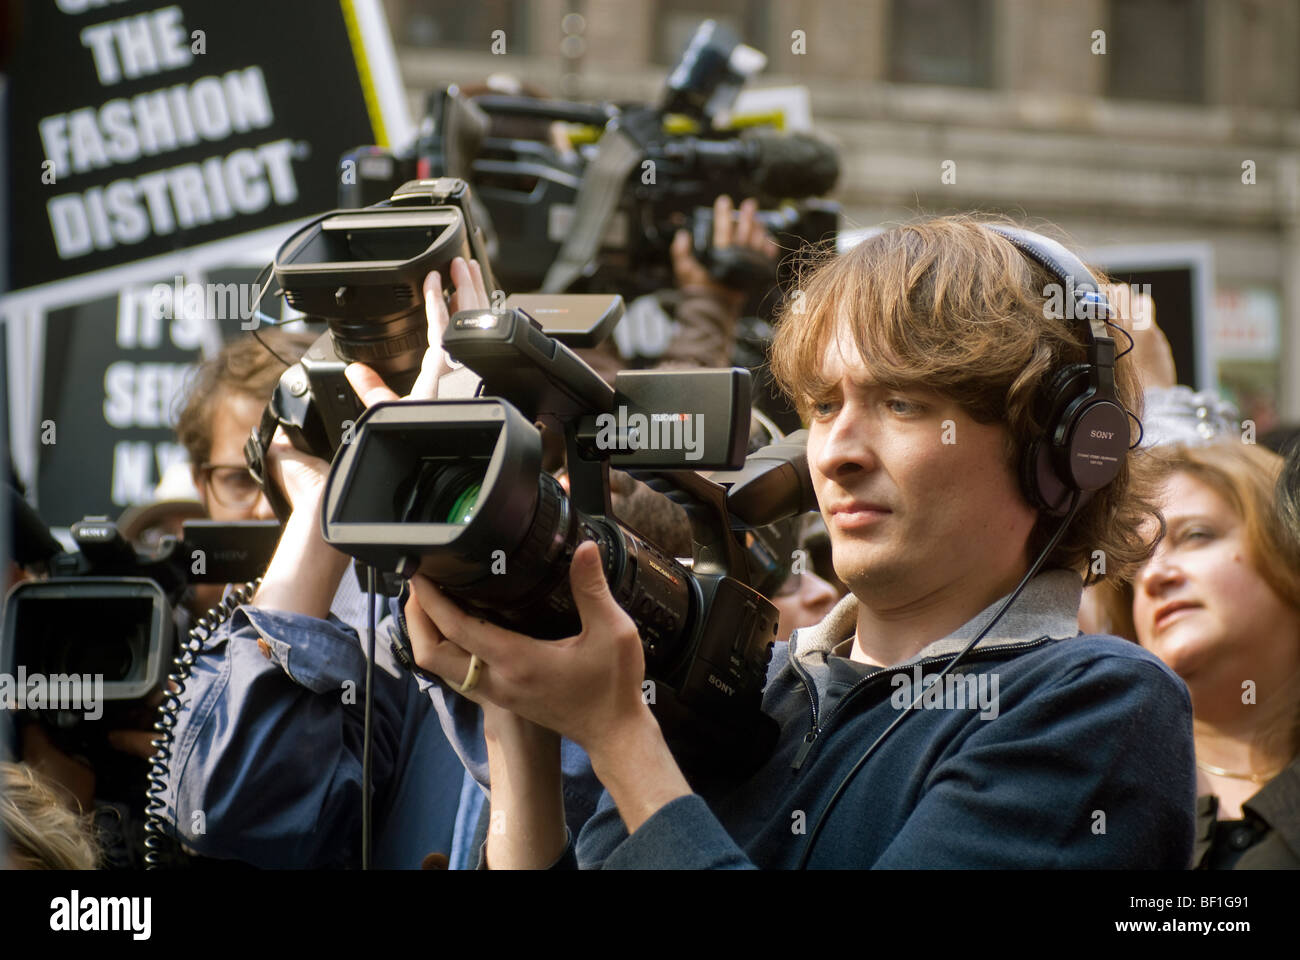 Television camera people at a rally in New York on Wednesday, October 21, 2009. (© Richard B. Levine) Stock Photo